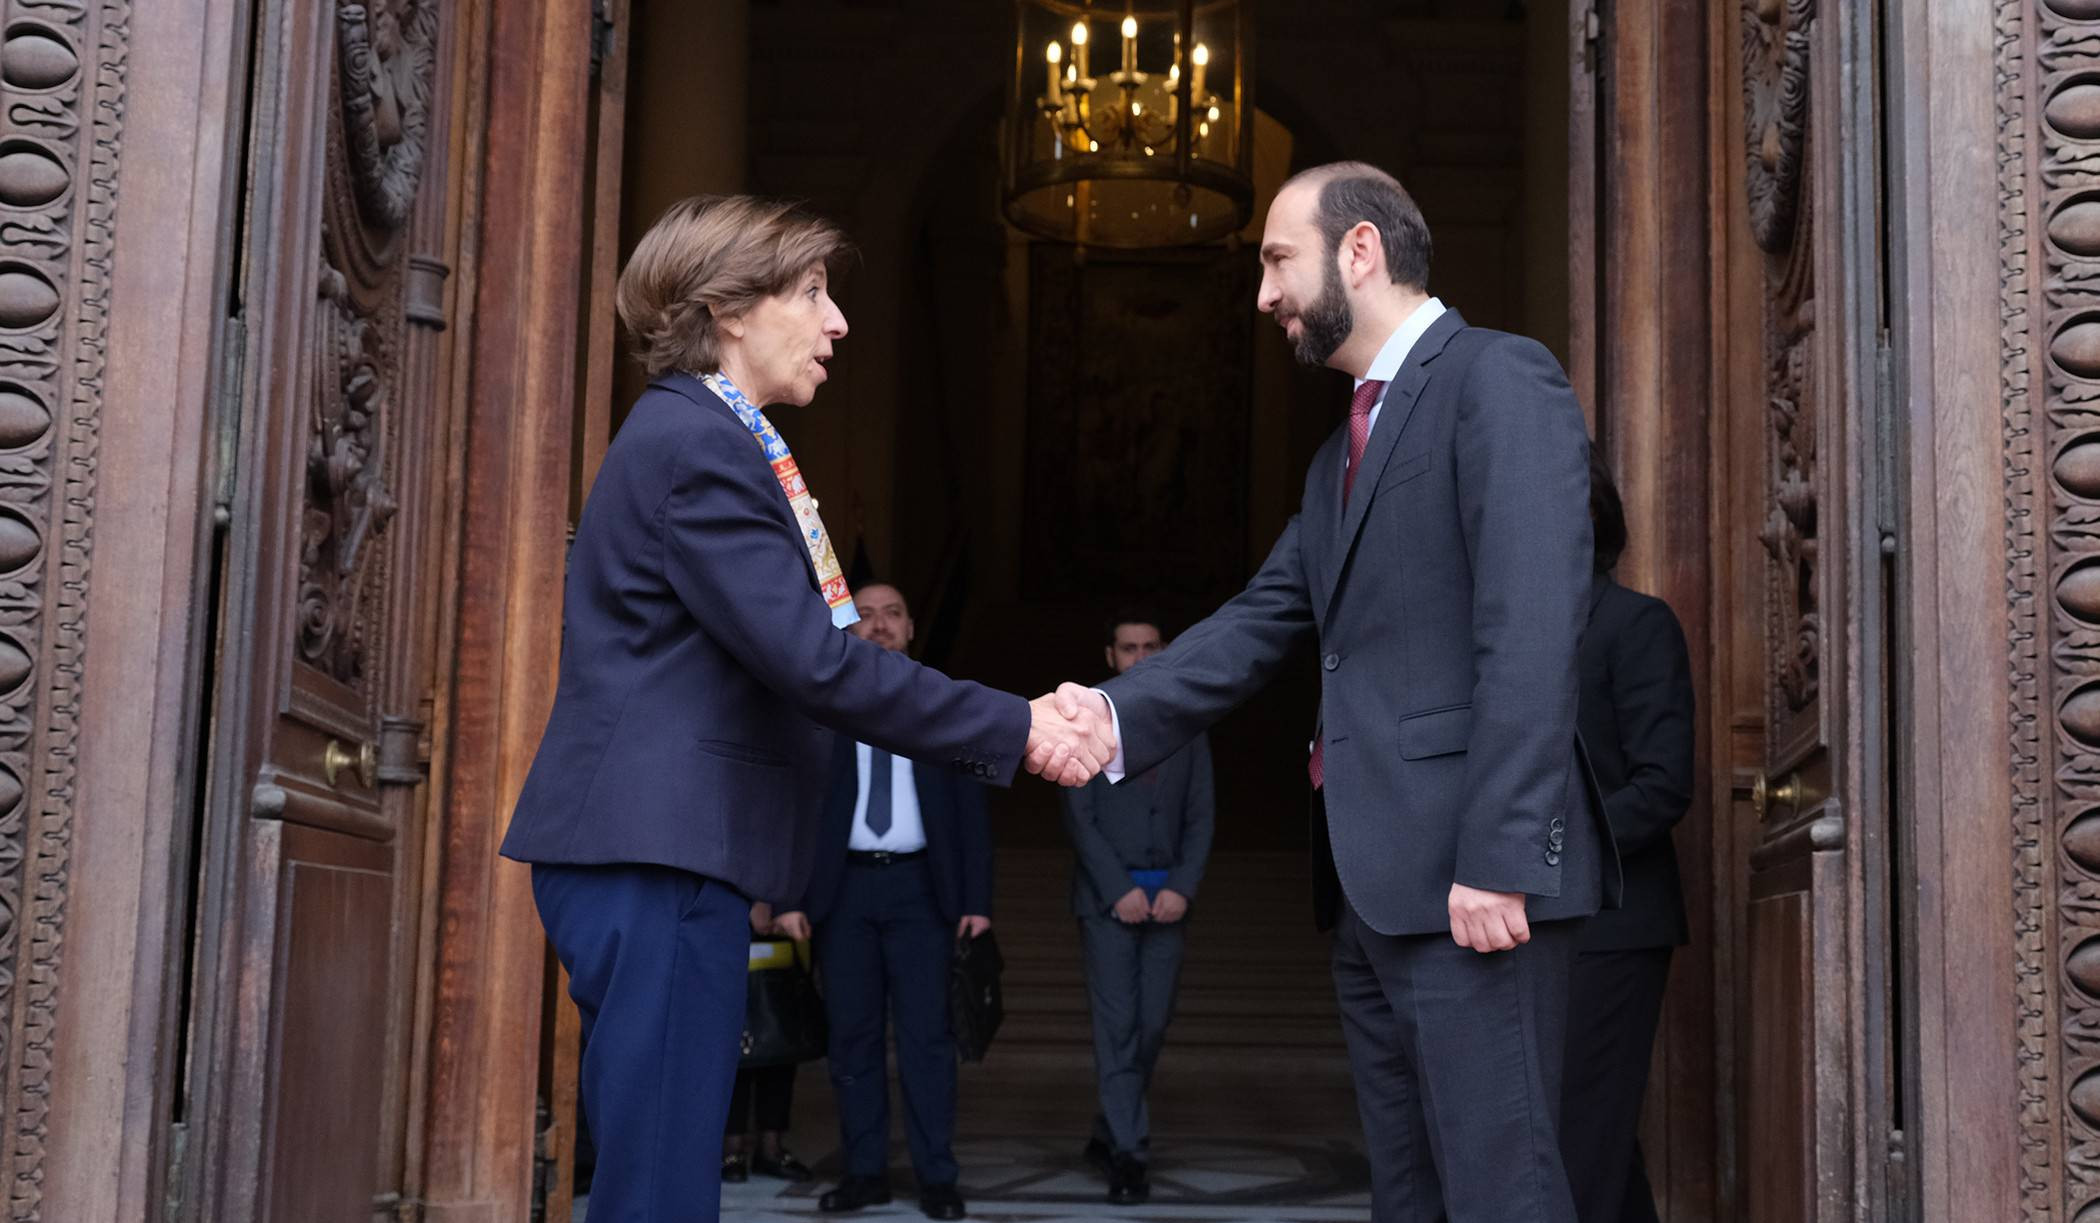 Meeting of Foreign Minister оf Armenia Ararat Mirzoyan with Foreign Minister of France Catherine Colonna